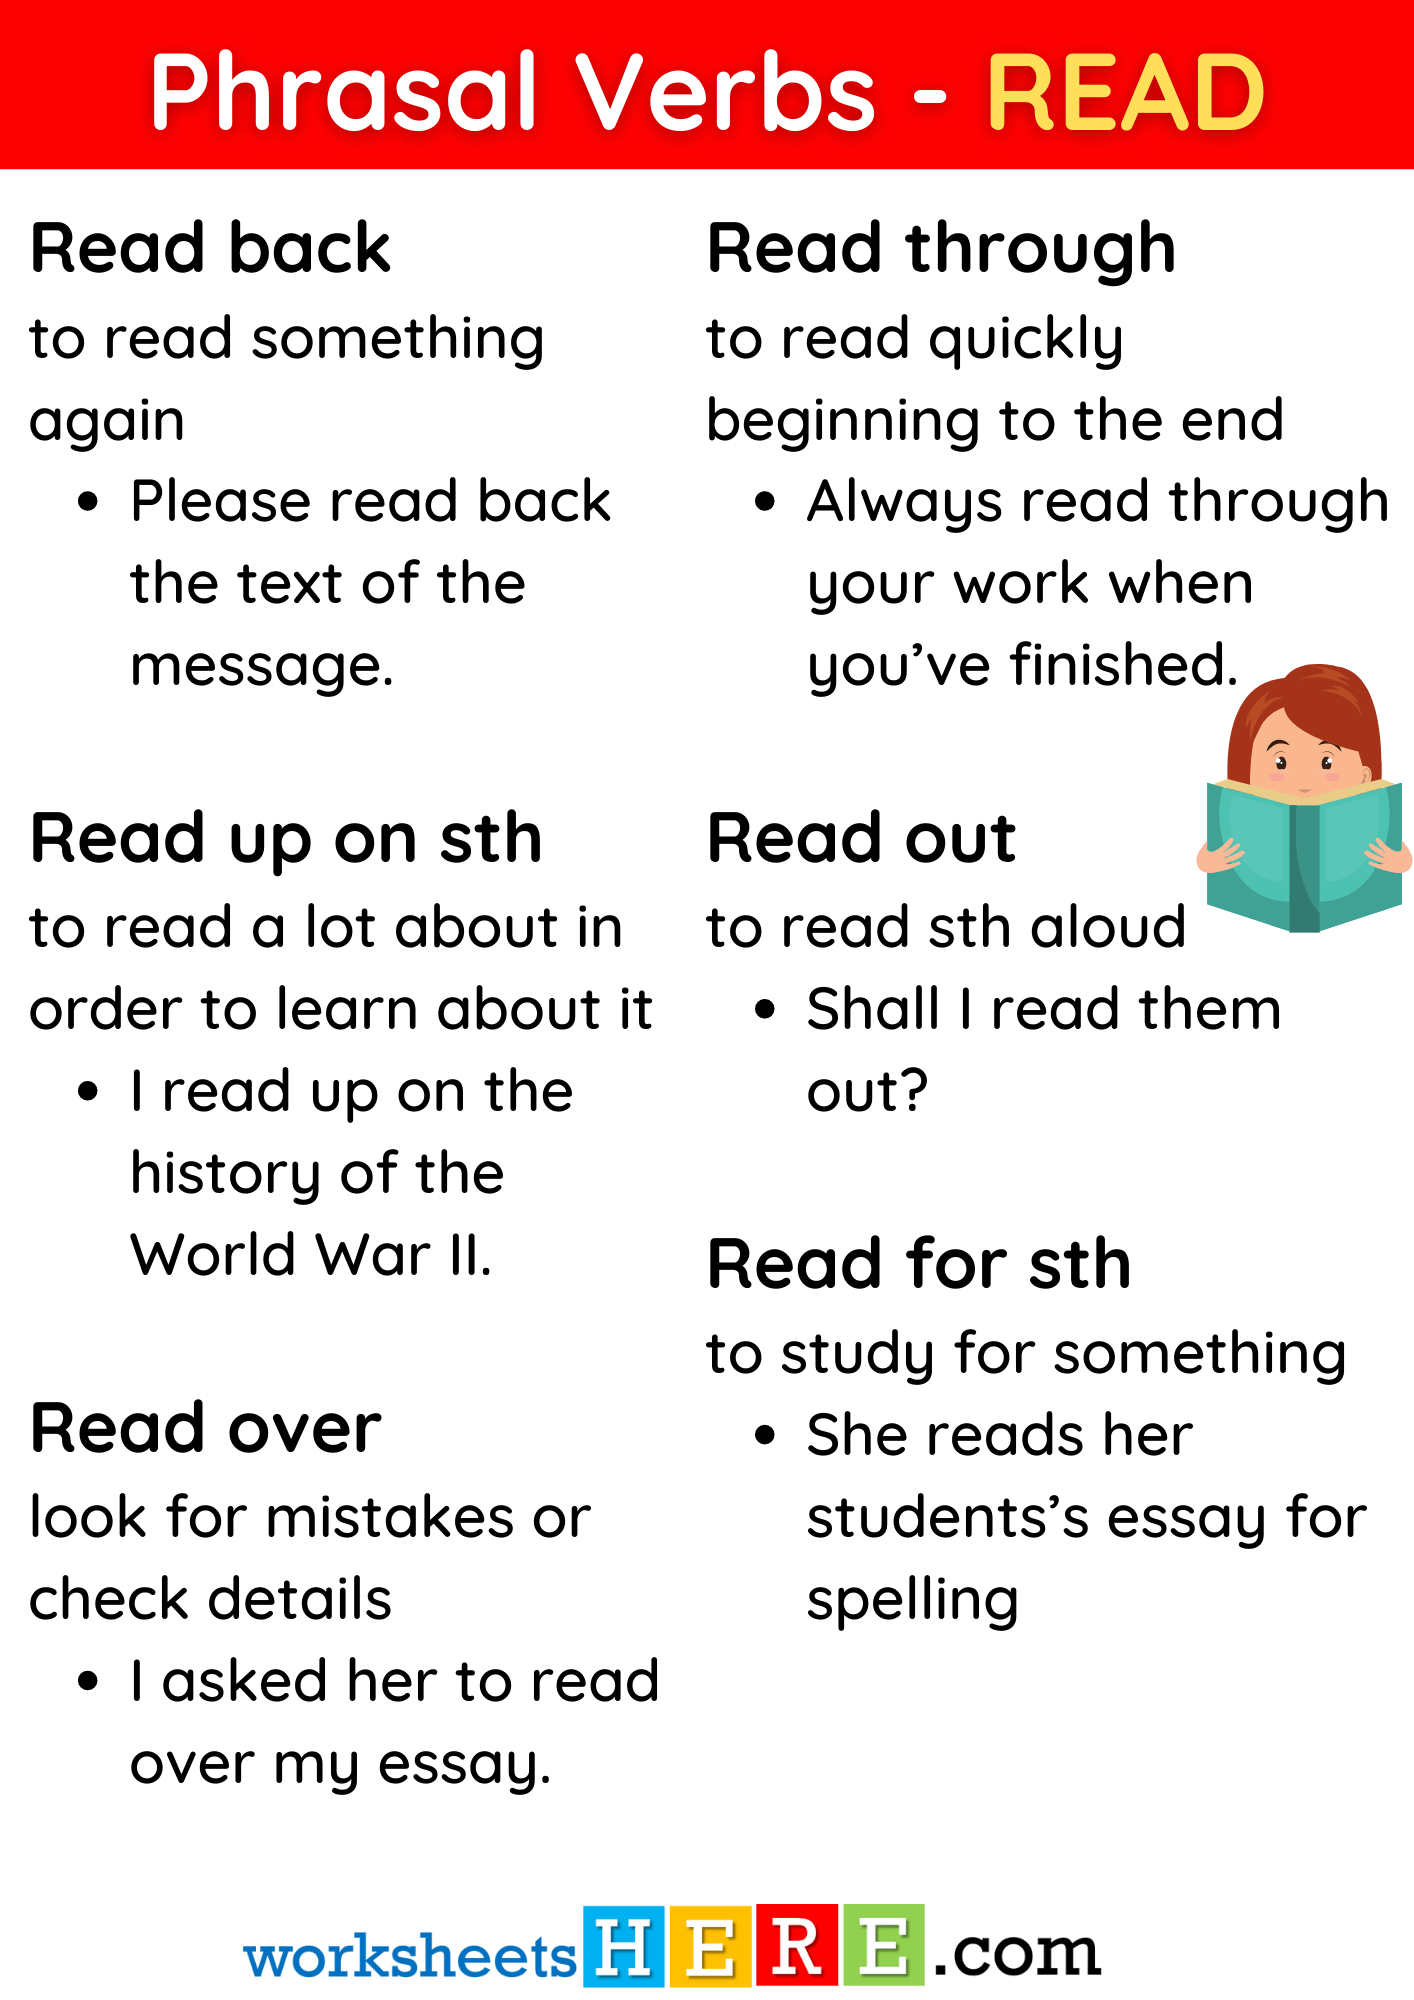 Phrasal Verbs with READ Definition and Example Sentences PDF Worksheet For Students